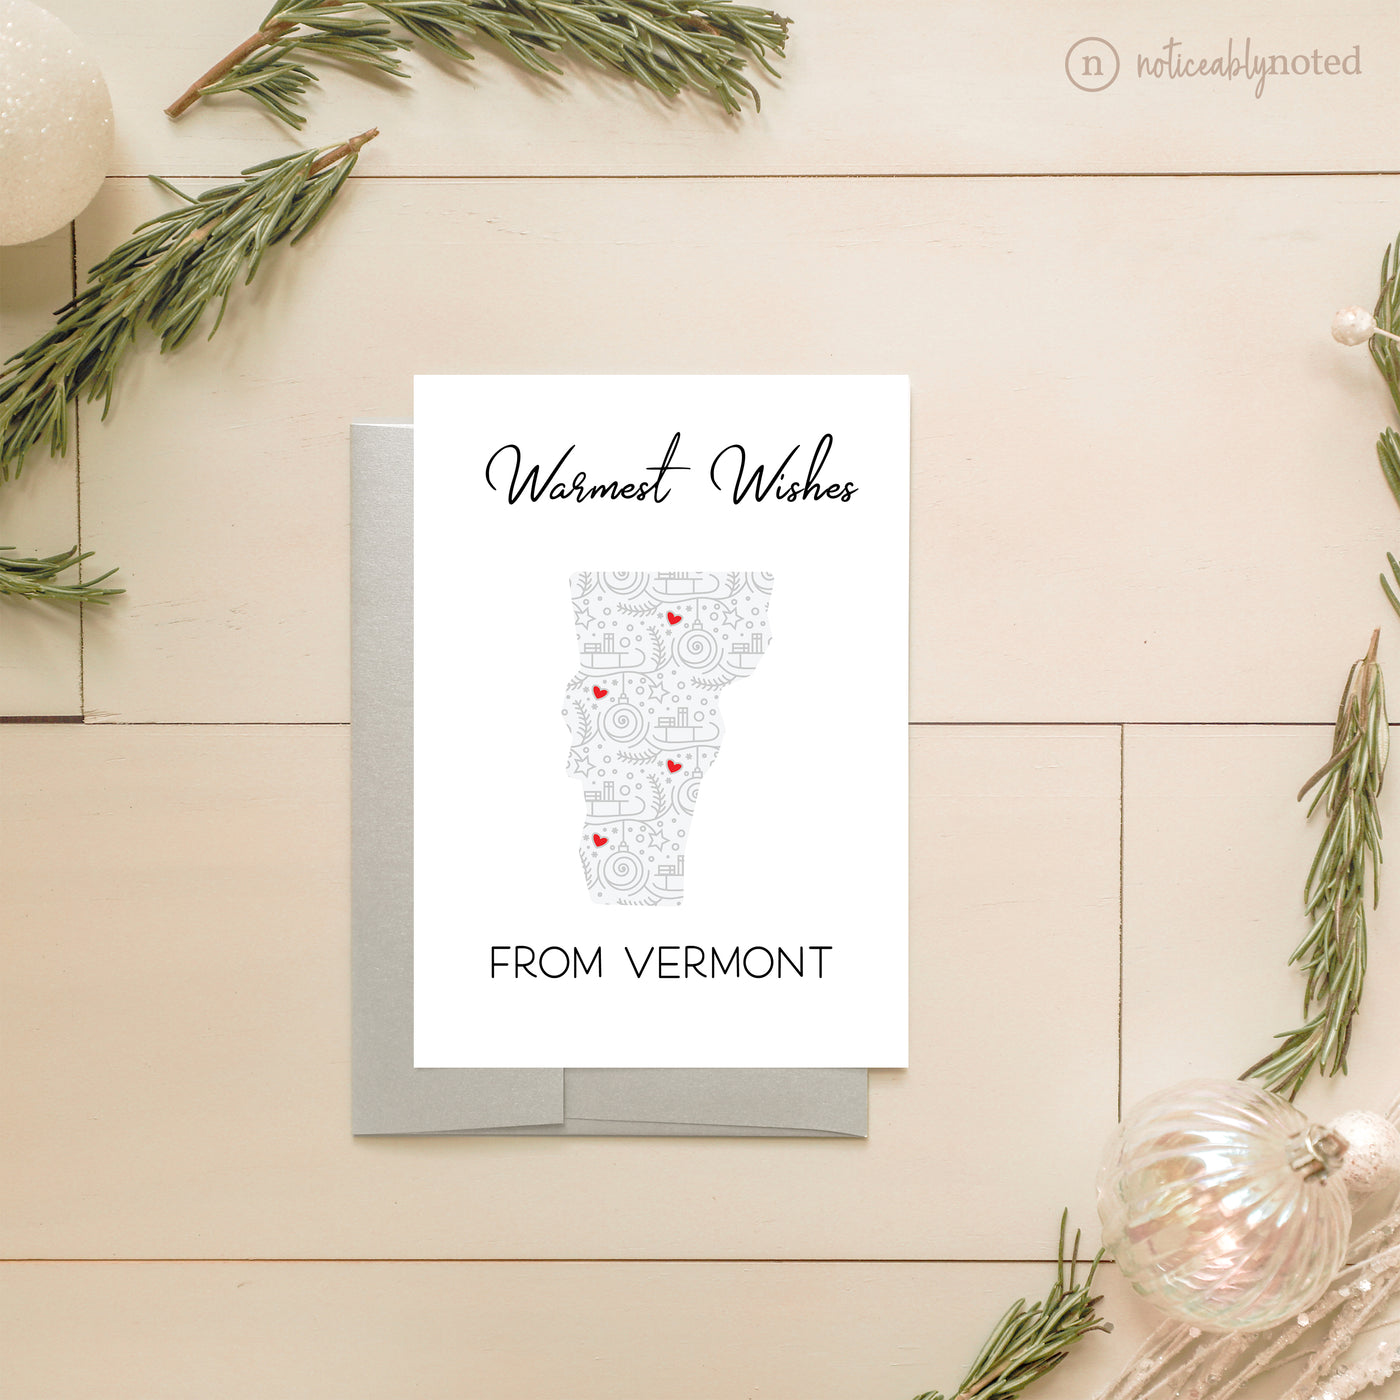 Vermont Christmas Card - Warmest Wishes | Noticeably Noted